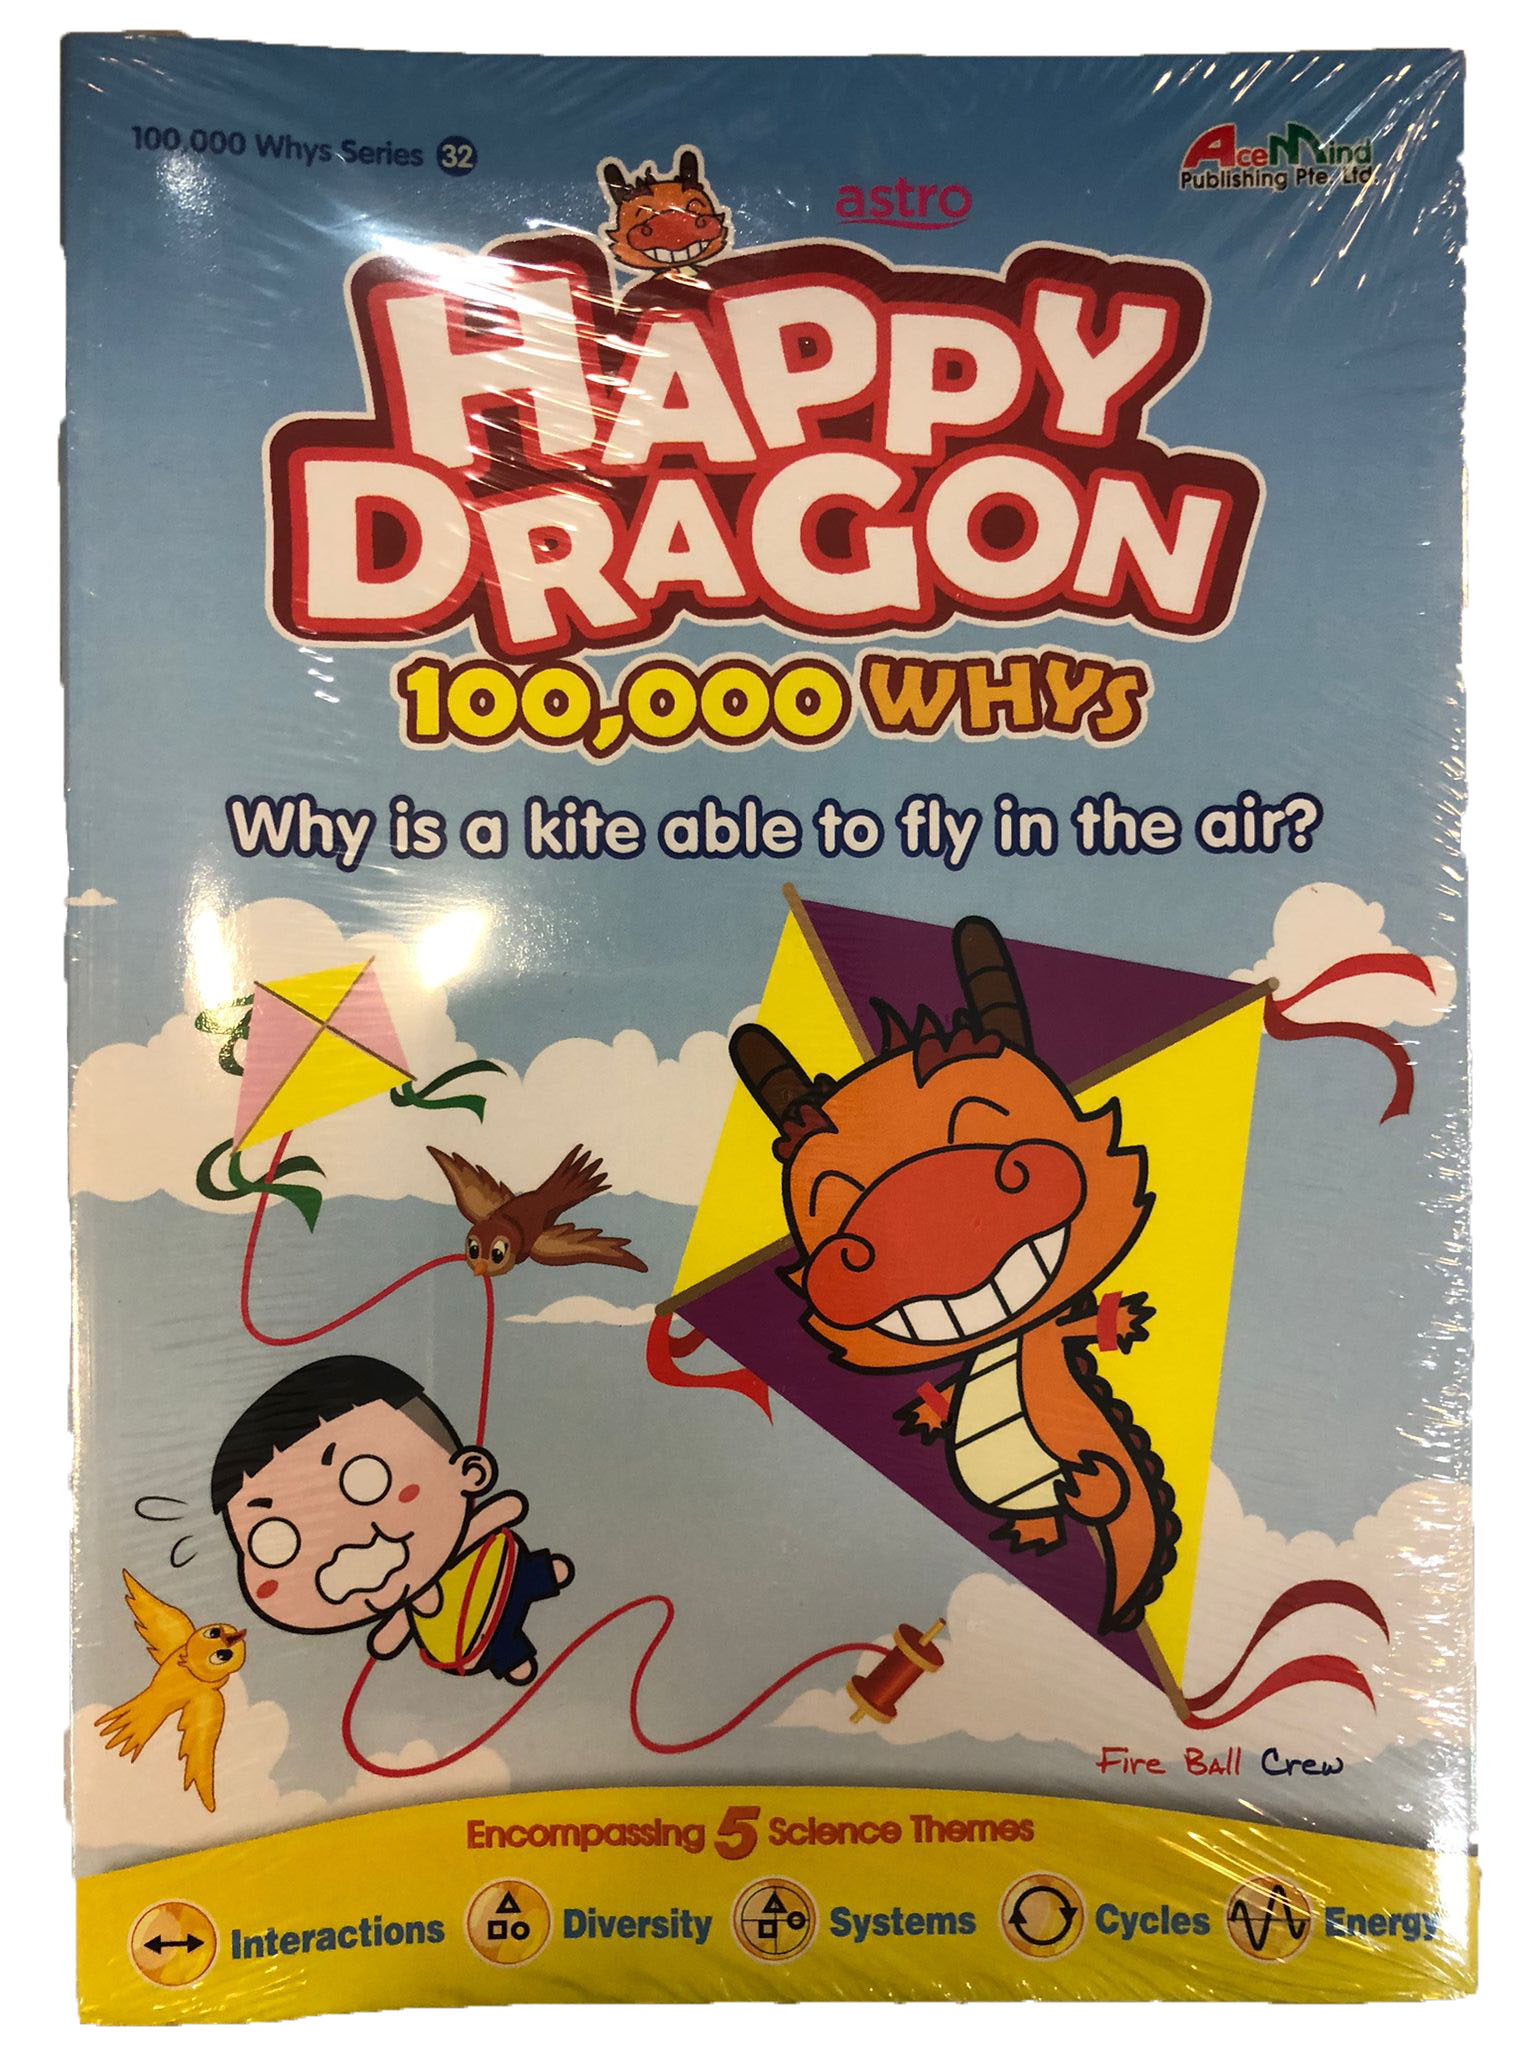 Happy Dragon #32 Why is a kite able to fly in the air?